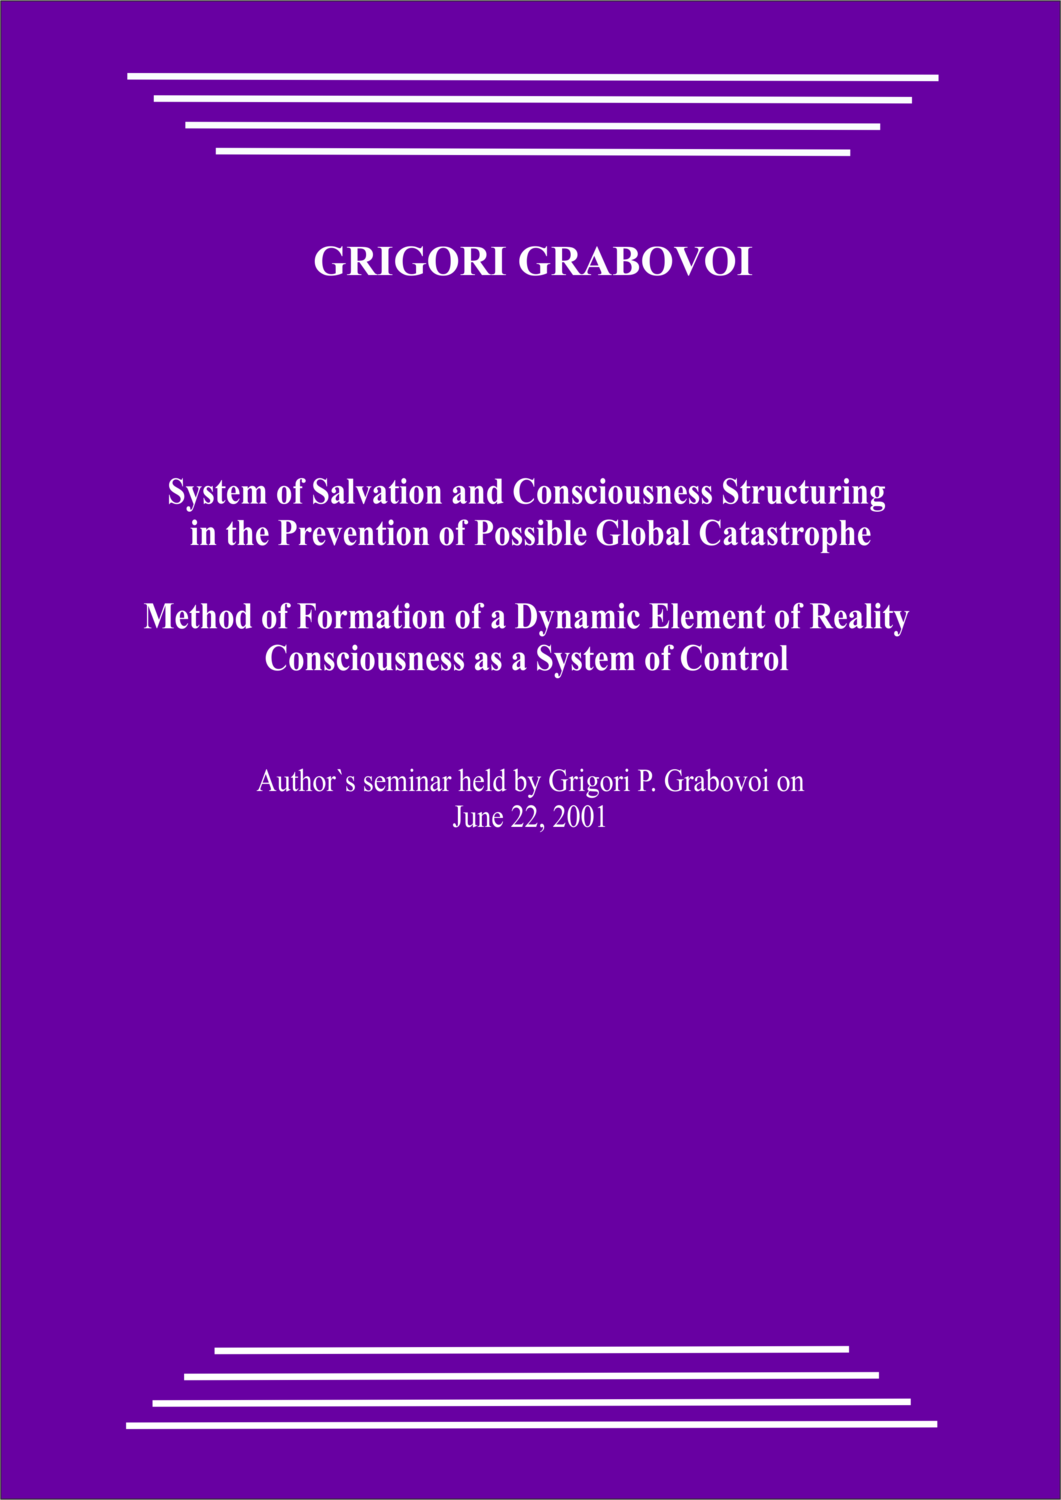 20010622_System of Salvation and Consciousness Structuring in the Prevention of Possible Global Catastrophe. Method of Formation of a Dynamic Element of Reality. Consciousness as a System of Control. (pdf)